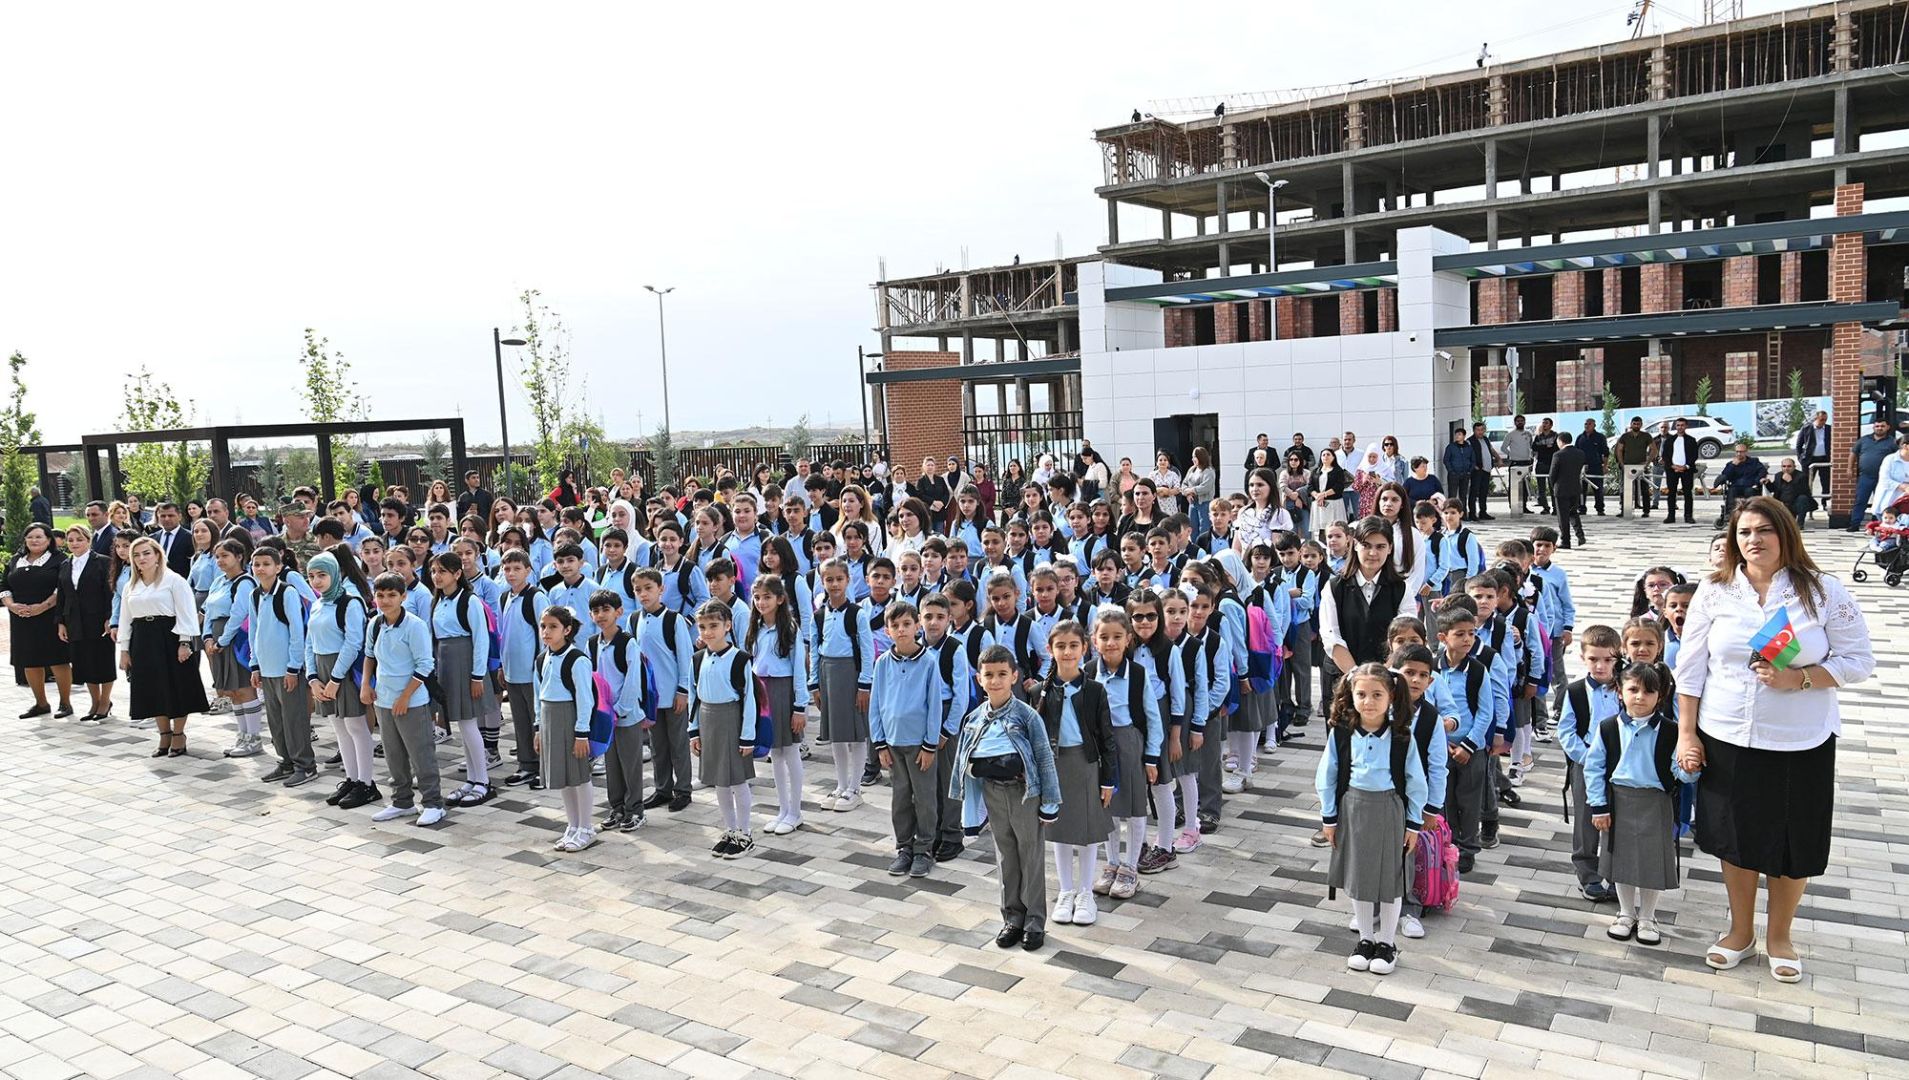 After 30 years, bell of first school year rings in Fuzuli [PHOTOS] - Gallery Image